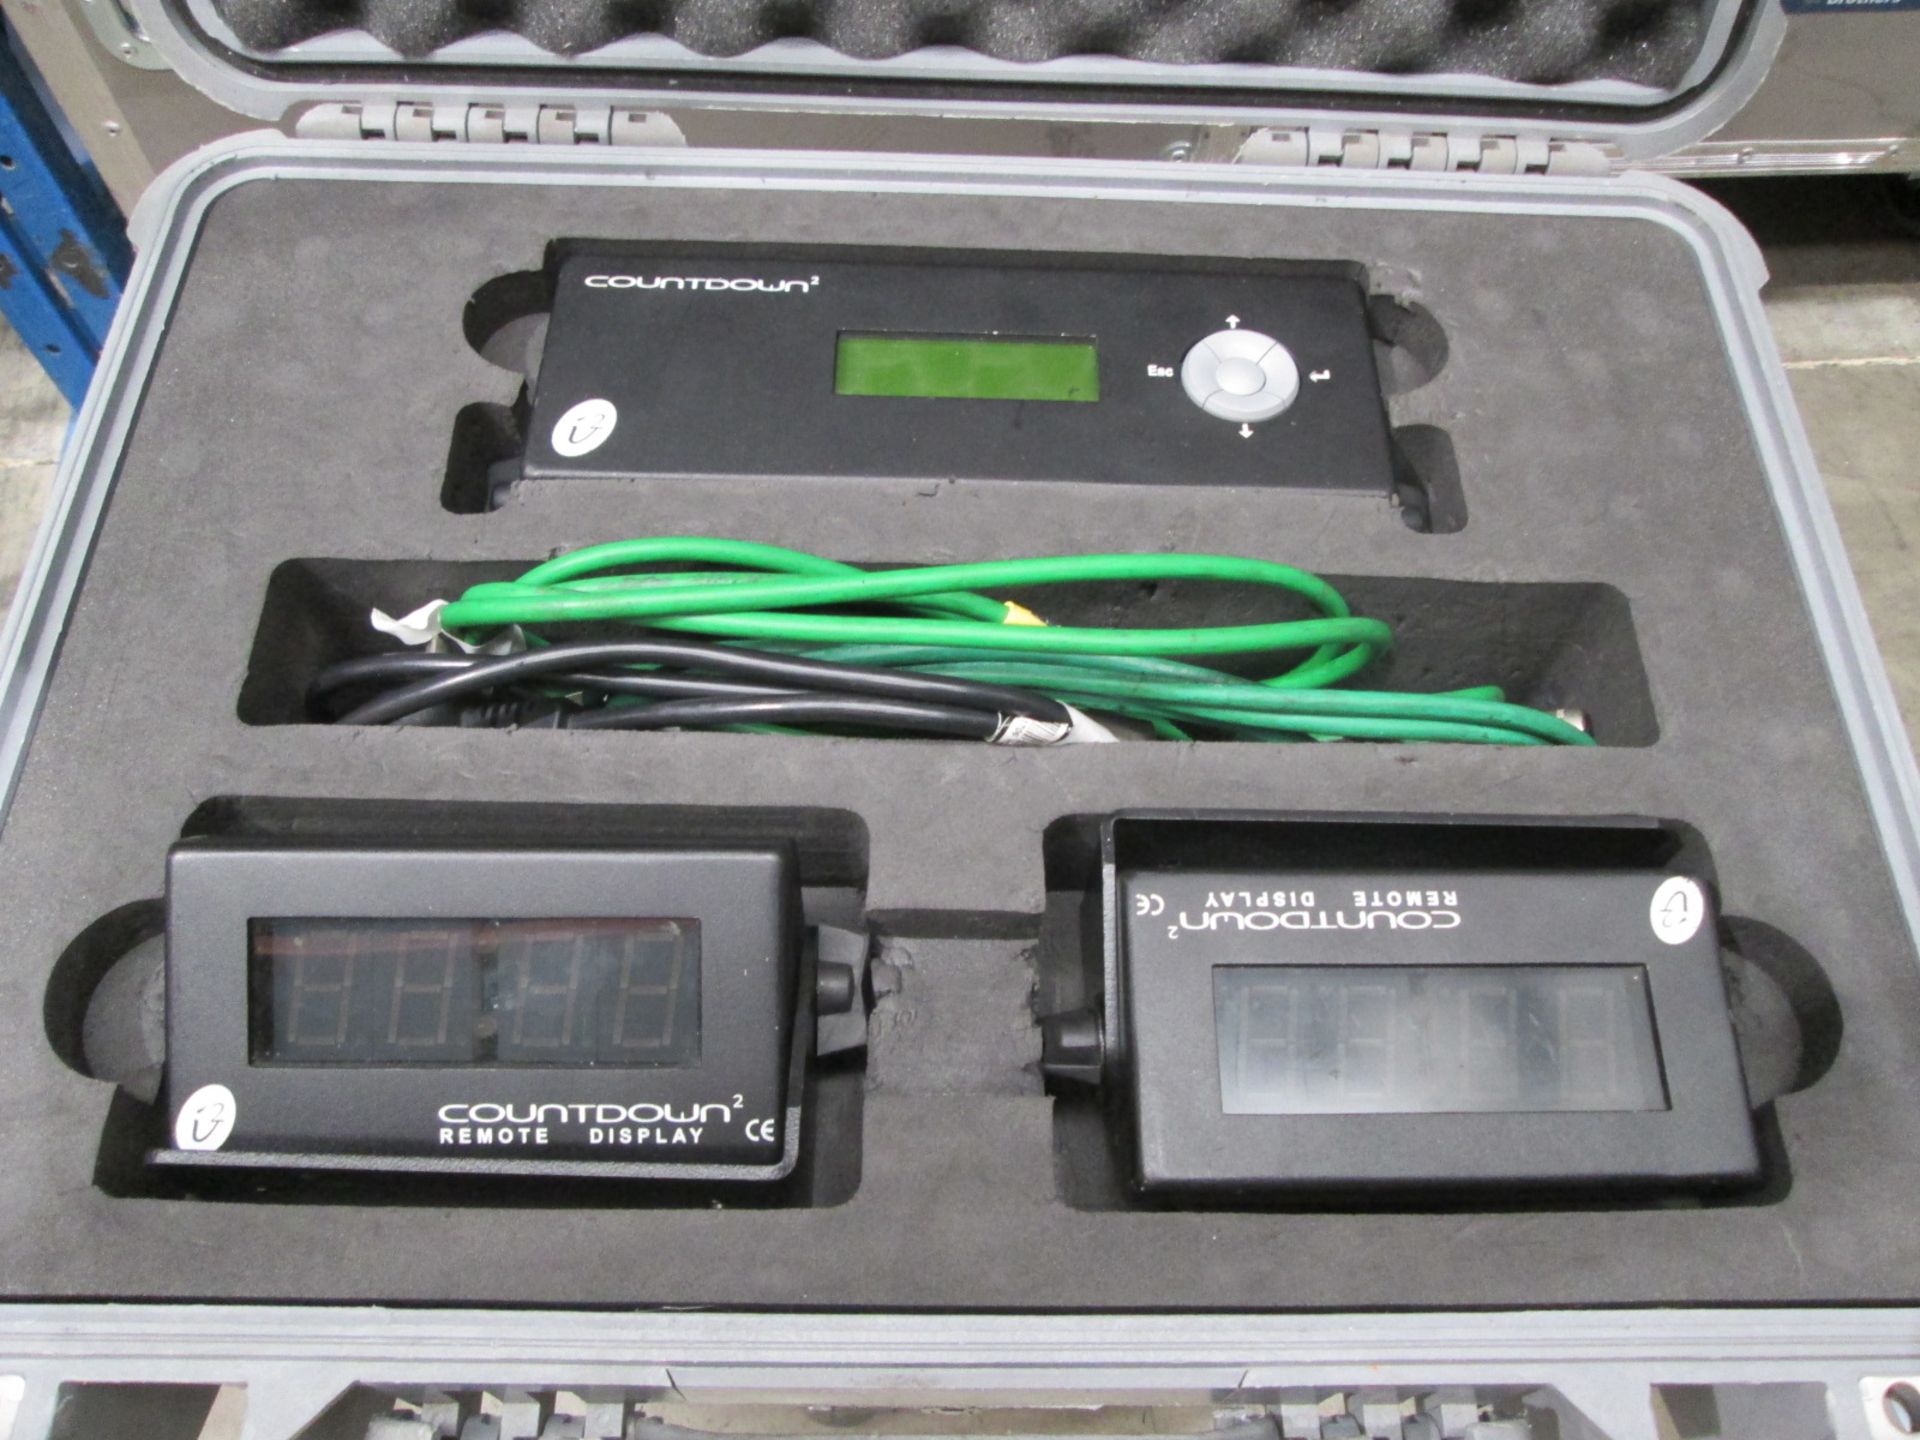 Interspace Industries Countdown Touch with 2 x CDD1 remote Displays, In flight case (Qty 7) - Image 4 of 5